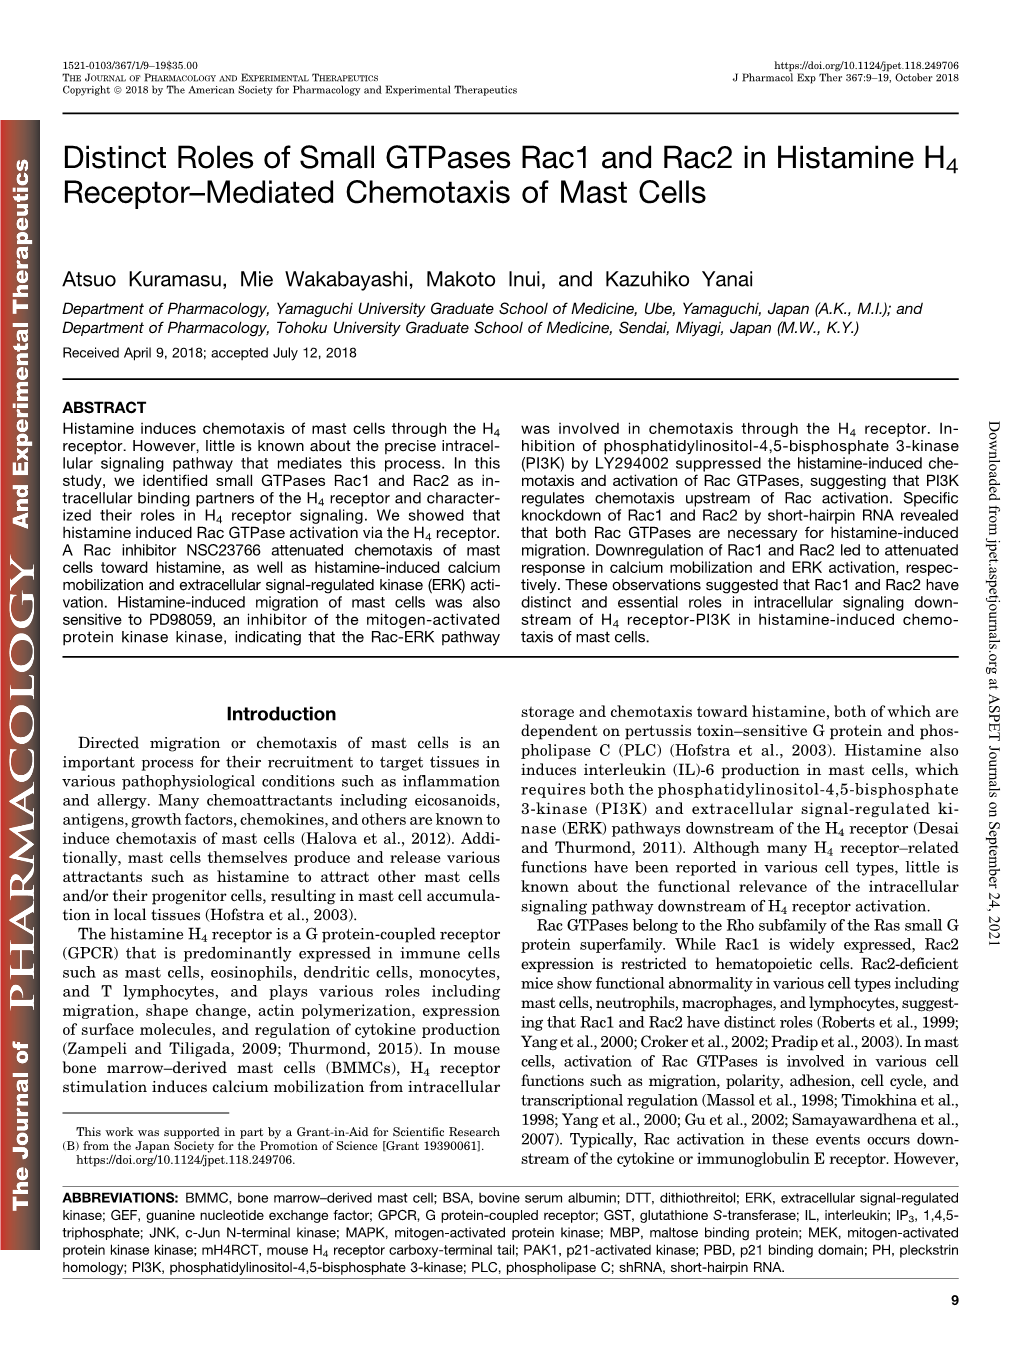 Distinct Roles of Small Gtpases Rac1 and Rac2 in Histamine H4 Receptor–Mediated Chemotaxis of Mast Cells